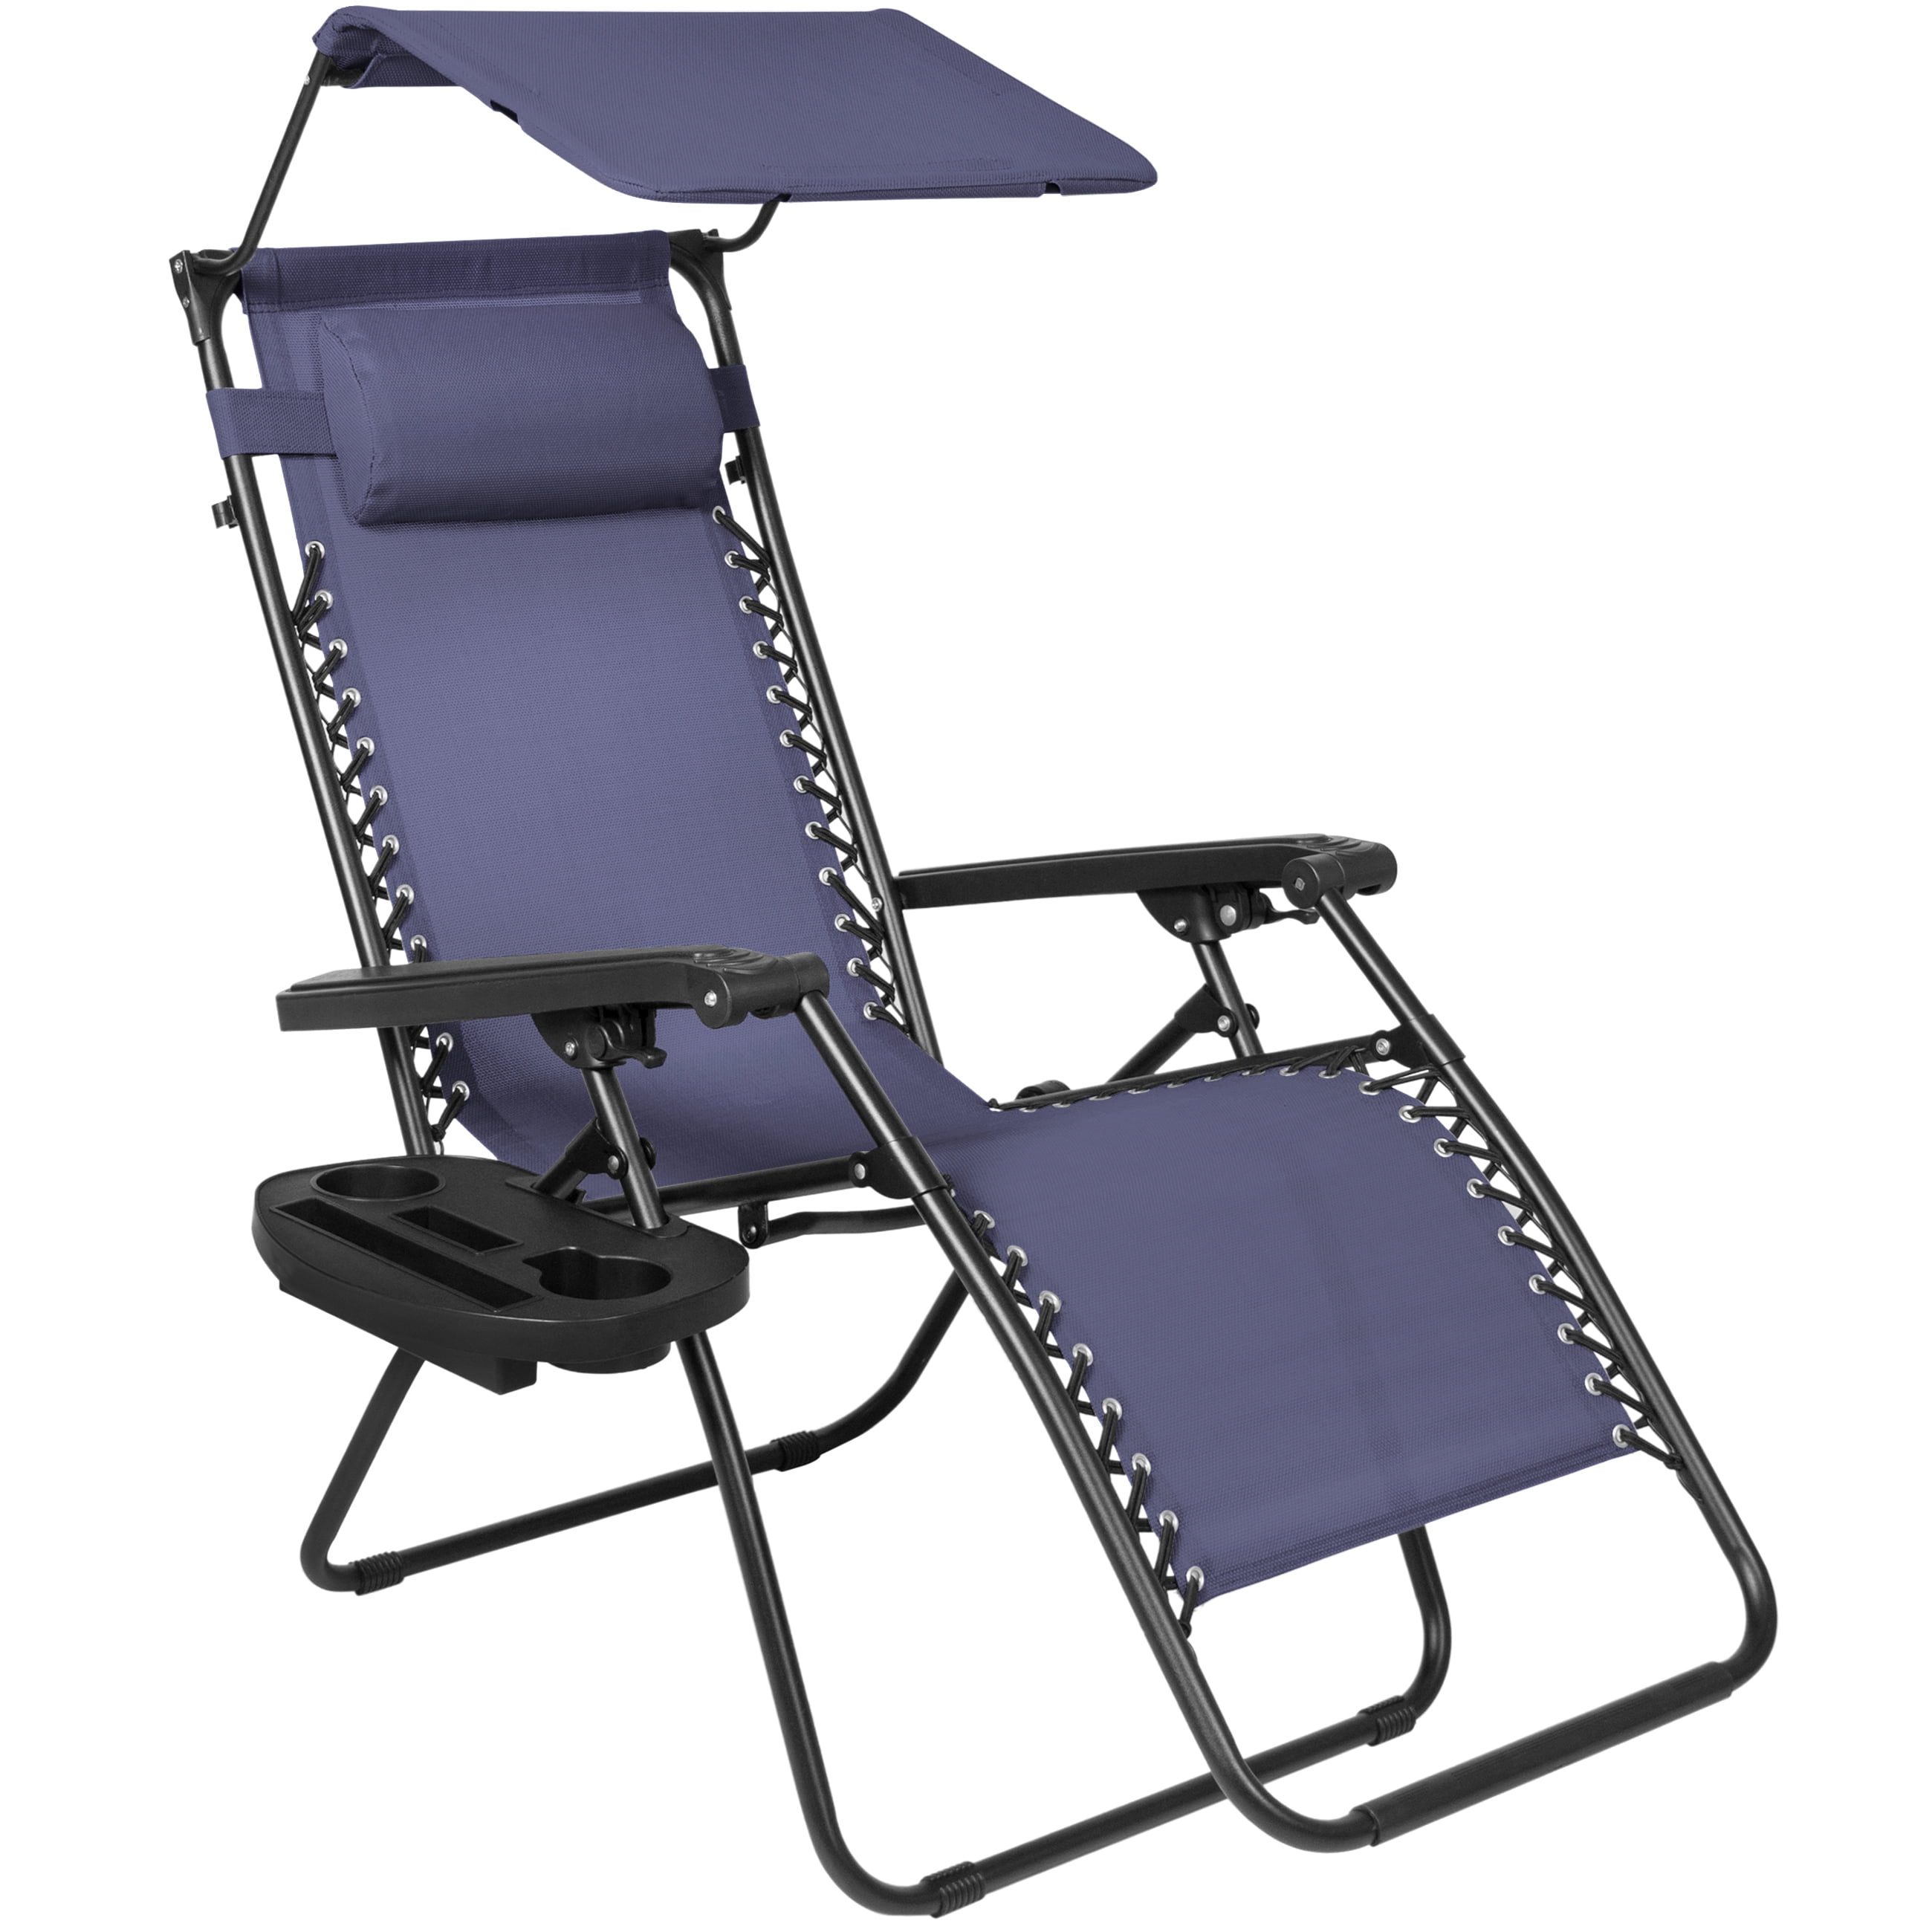 chair with canopy walmart